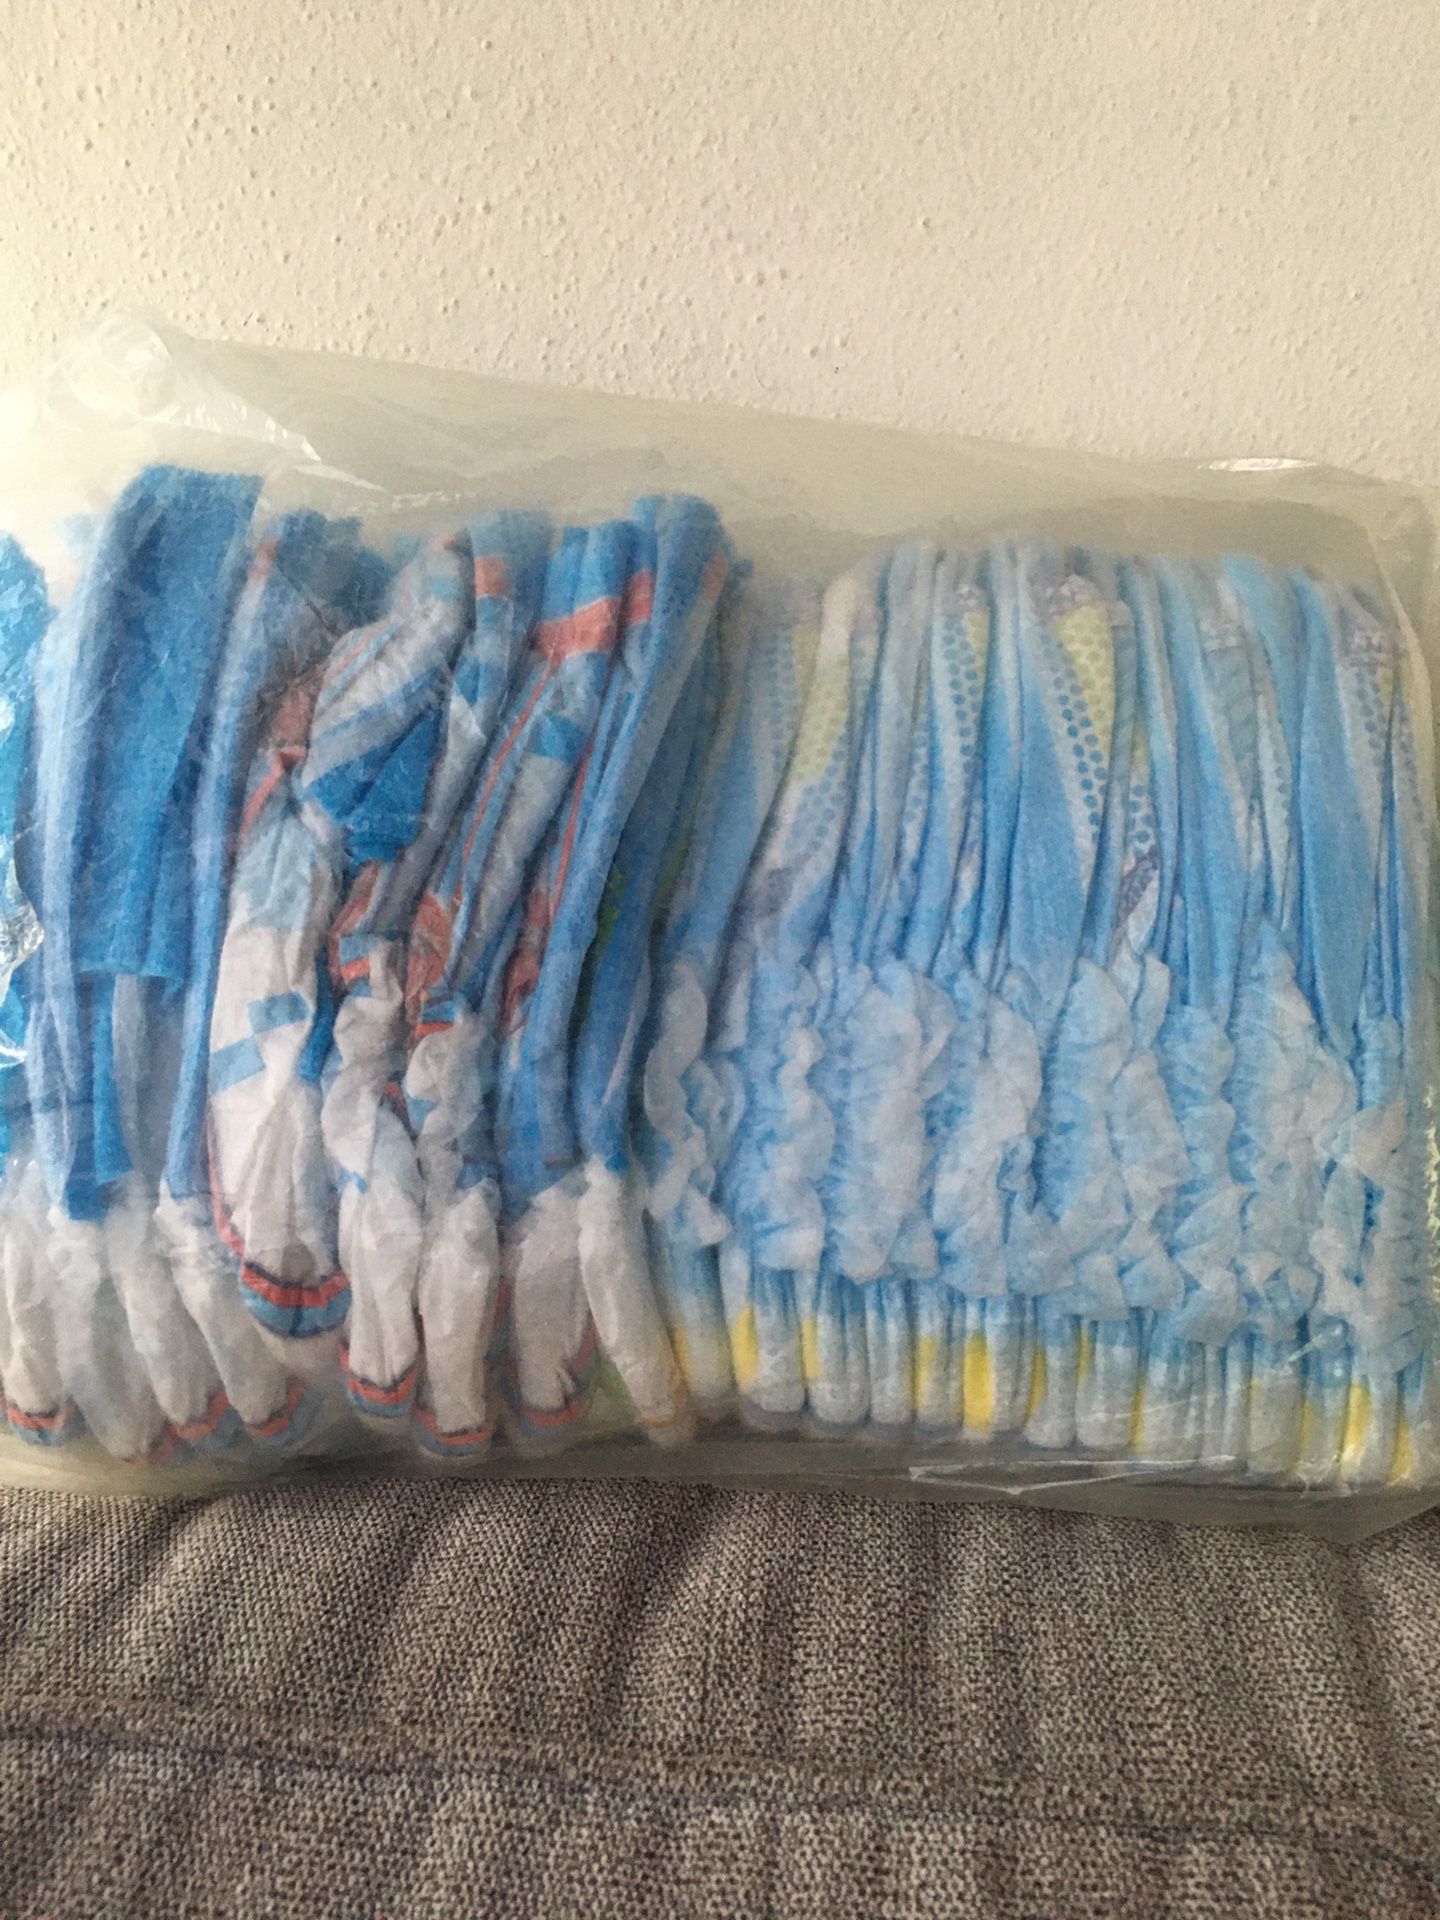 Mixed package of pull-ups diapers size 3-4